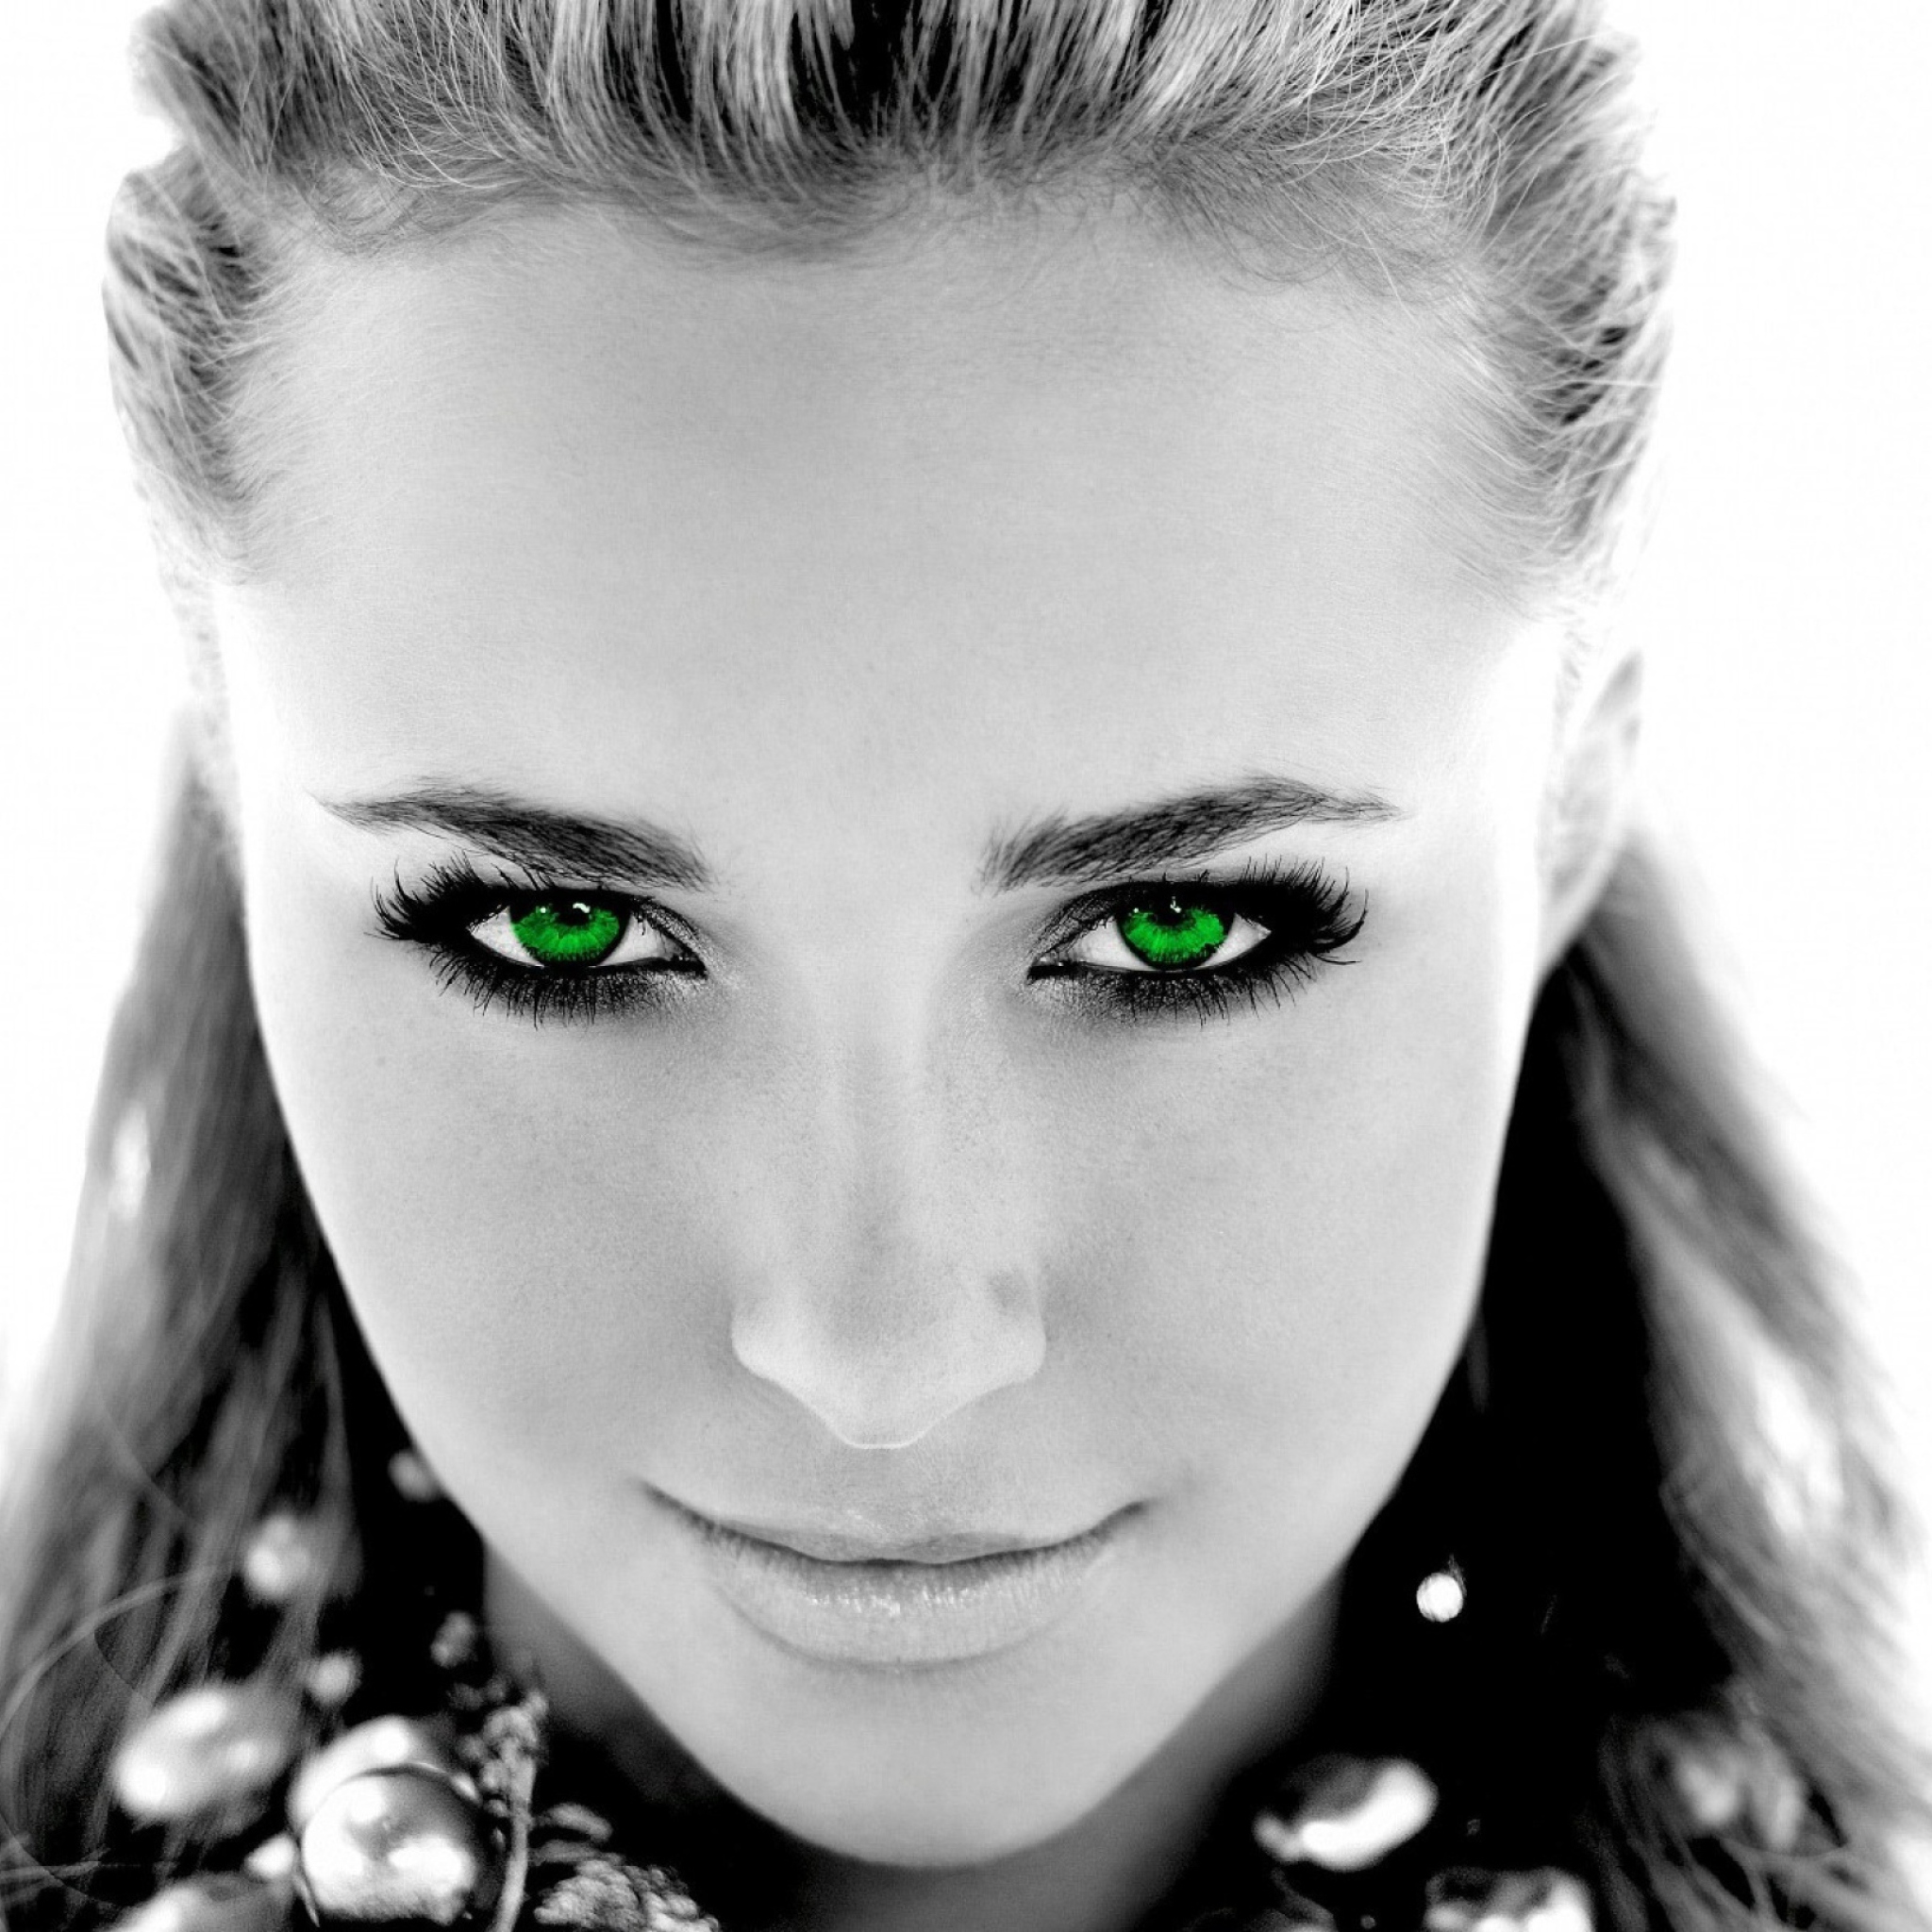 Girl With Green Eyes wallpaper 2048x2048